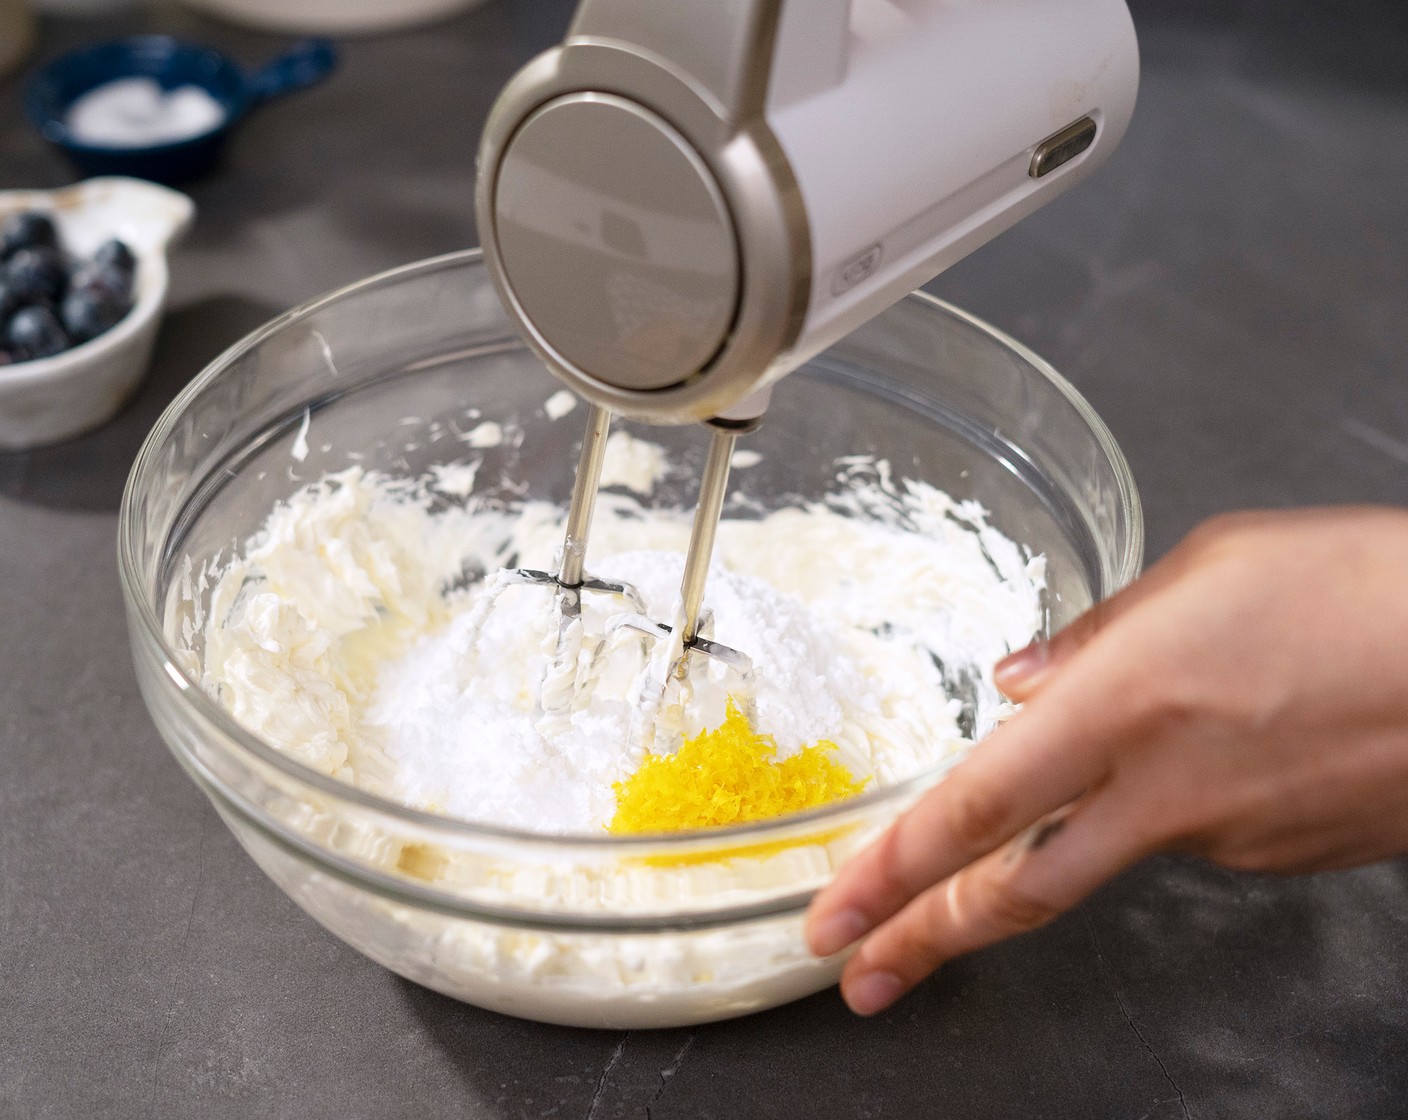 step 4 In a large mixing bowl, beat Cream Cheese (2 cups) with a hand mixer until smooth. Add Powdered Confectioners Sugar (1/2 cup) and zest of a Lemon (1). Beat until smooth on low to medium speed. Use a spatula to scrape down the sides to ensure the mixture is fully incorporated.